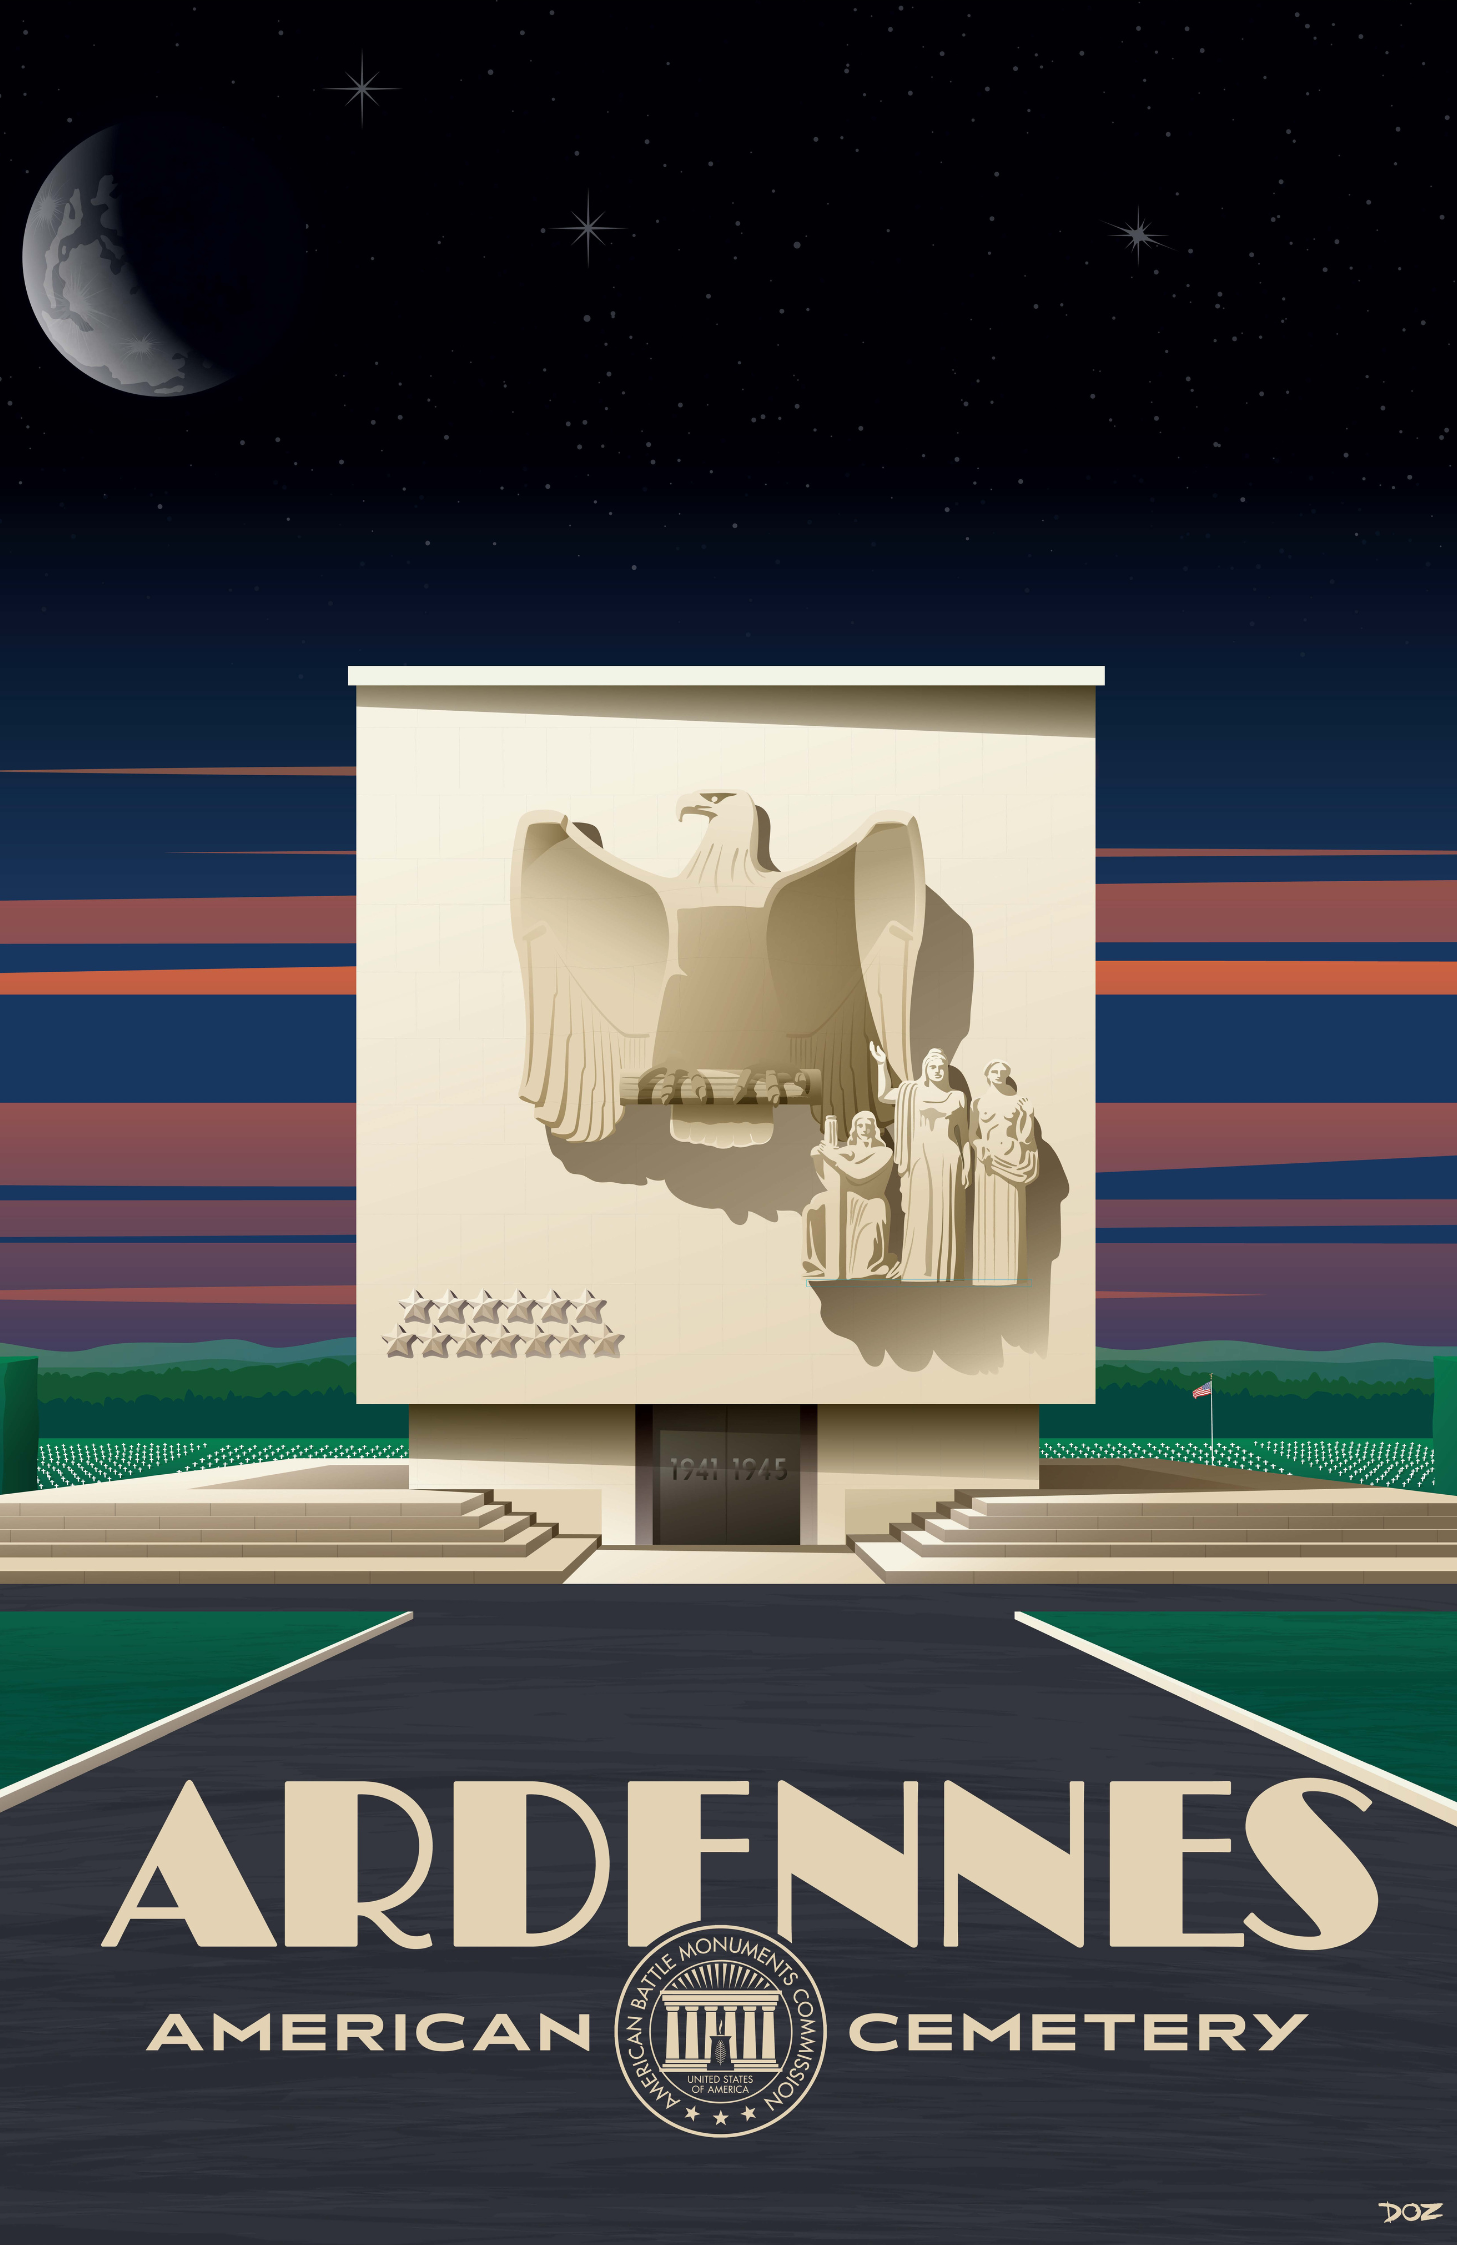 Vintage poster of Ardennes American Cemetery